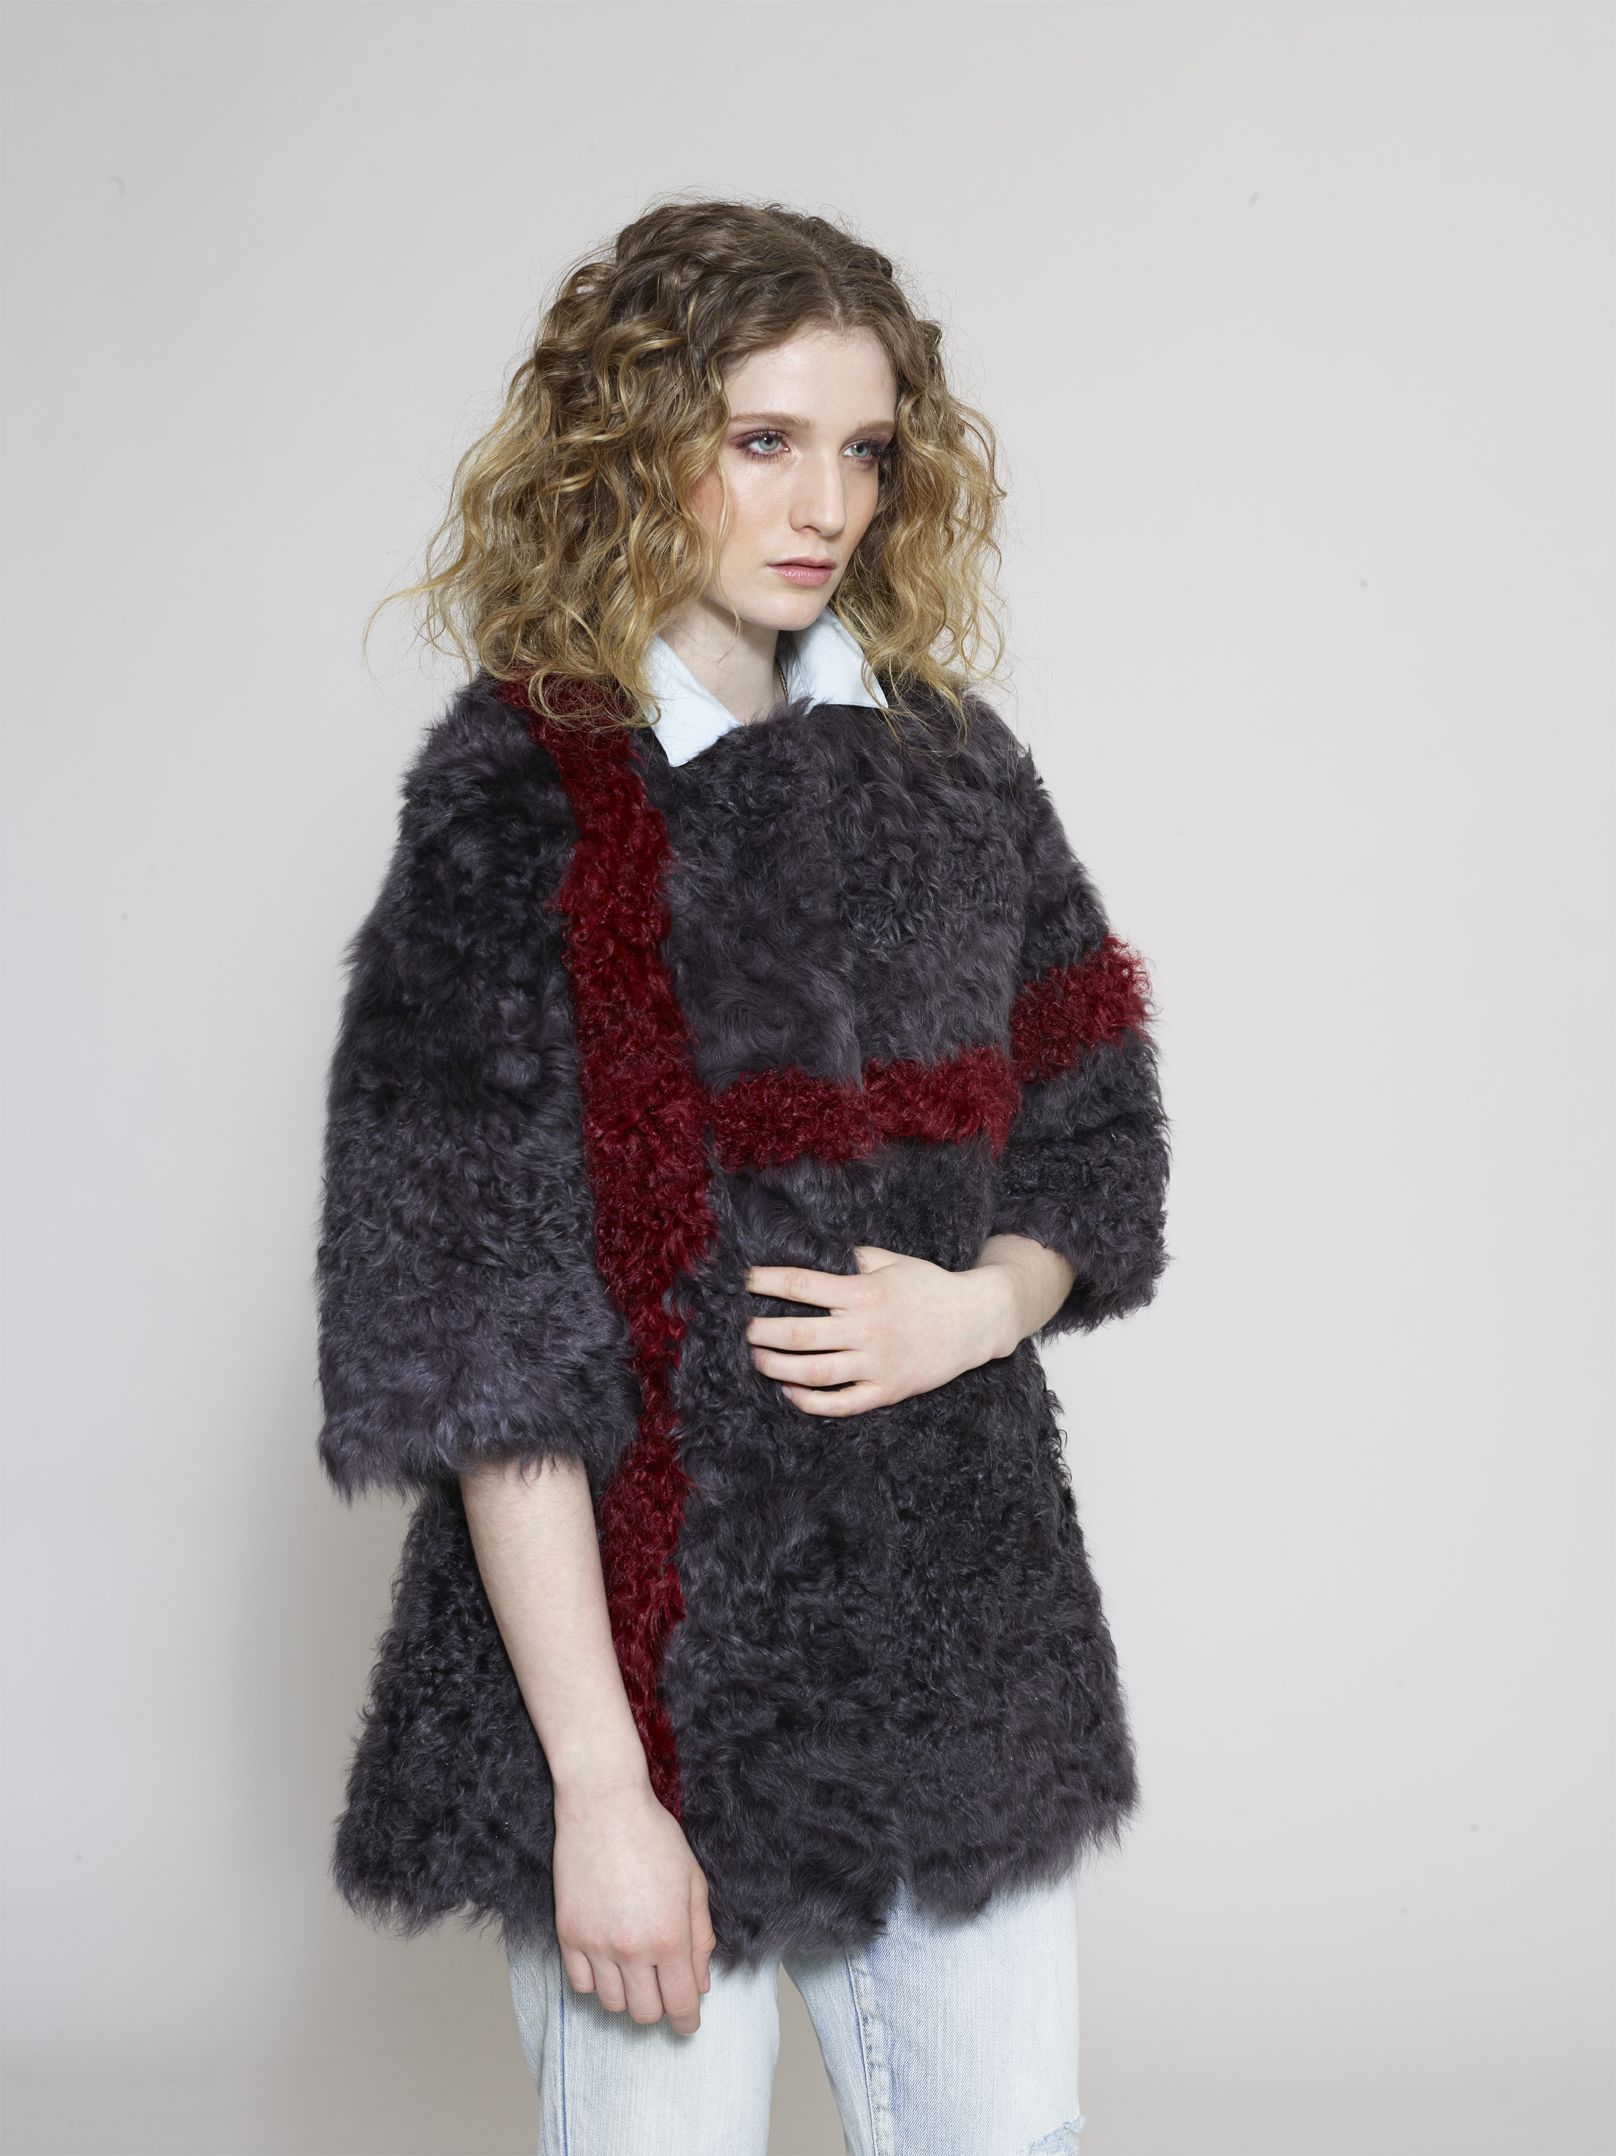 Annabelle New York Fall 2014 — Something by Sonjia